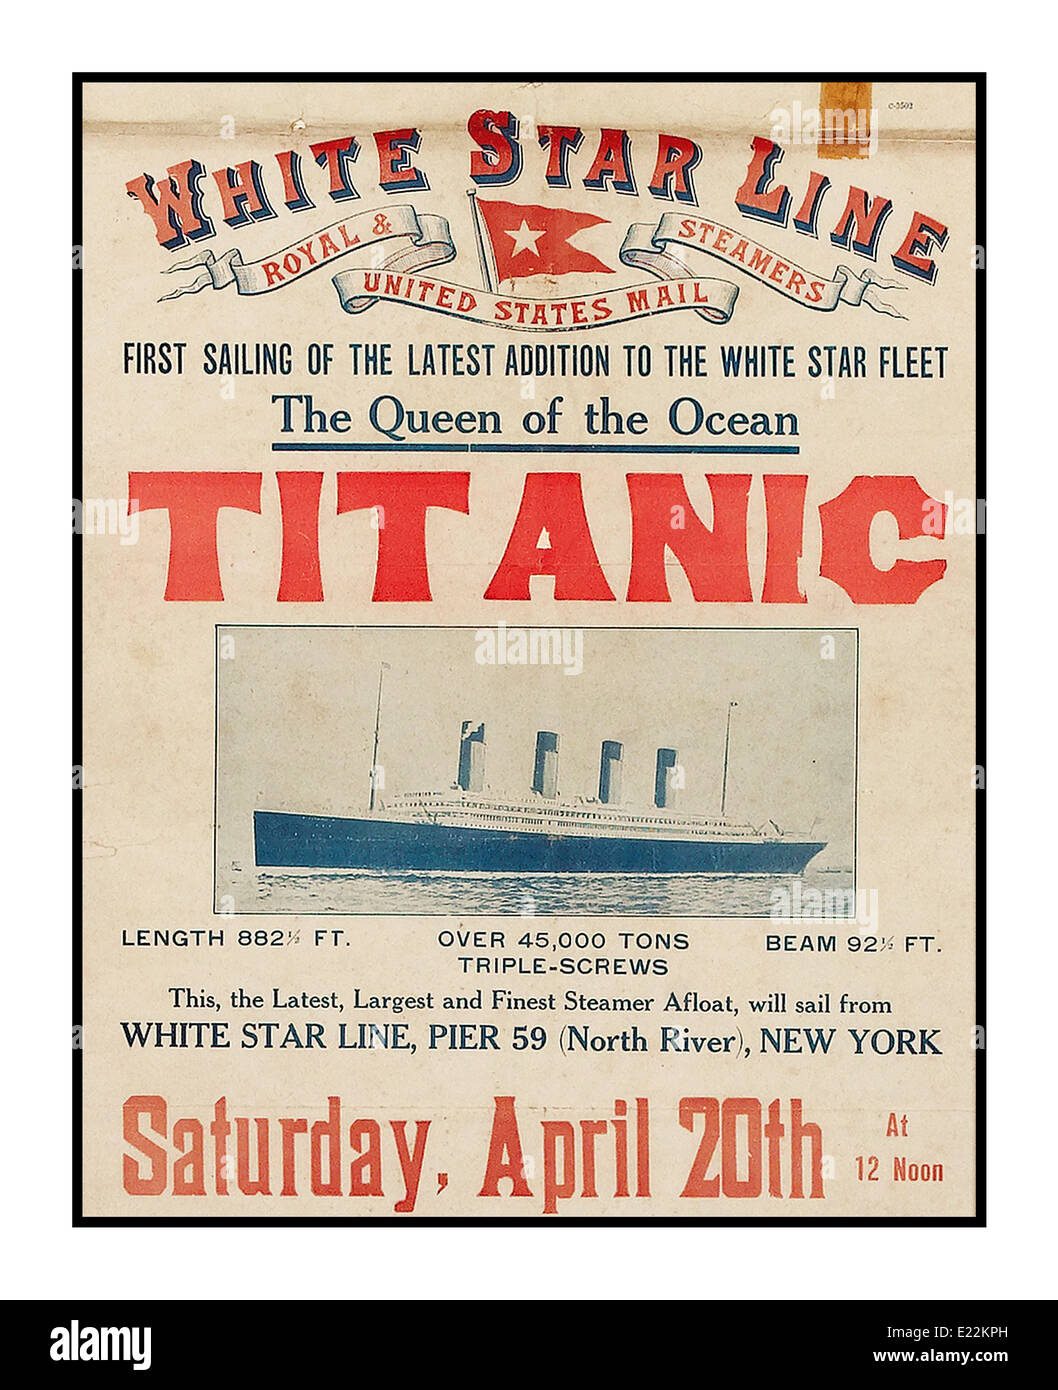 cunard - Le RMS Lusitania - Page 11 Titanic-poster-advertising-the-first-sailing-of-titanic-from-new-york-E22KPH